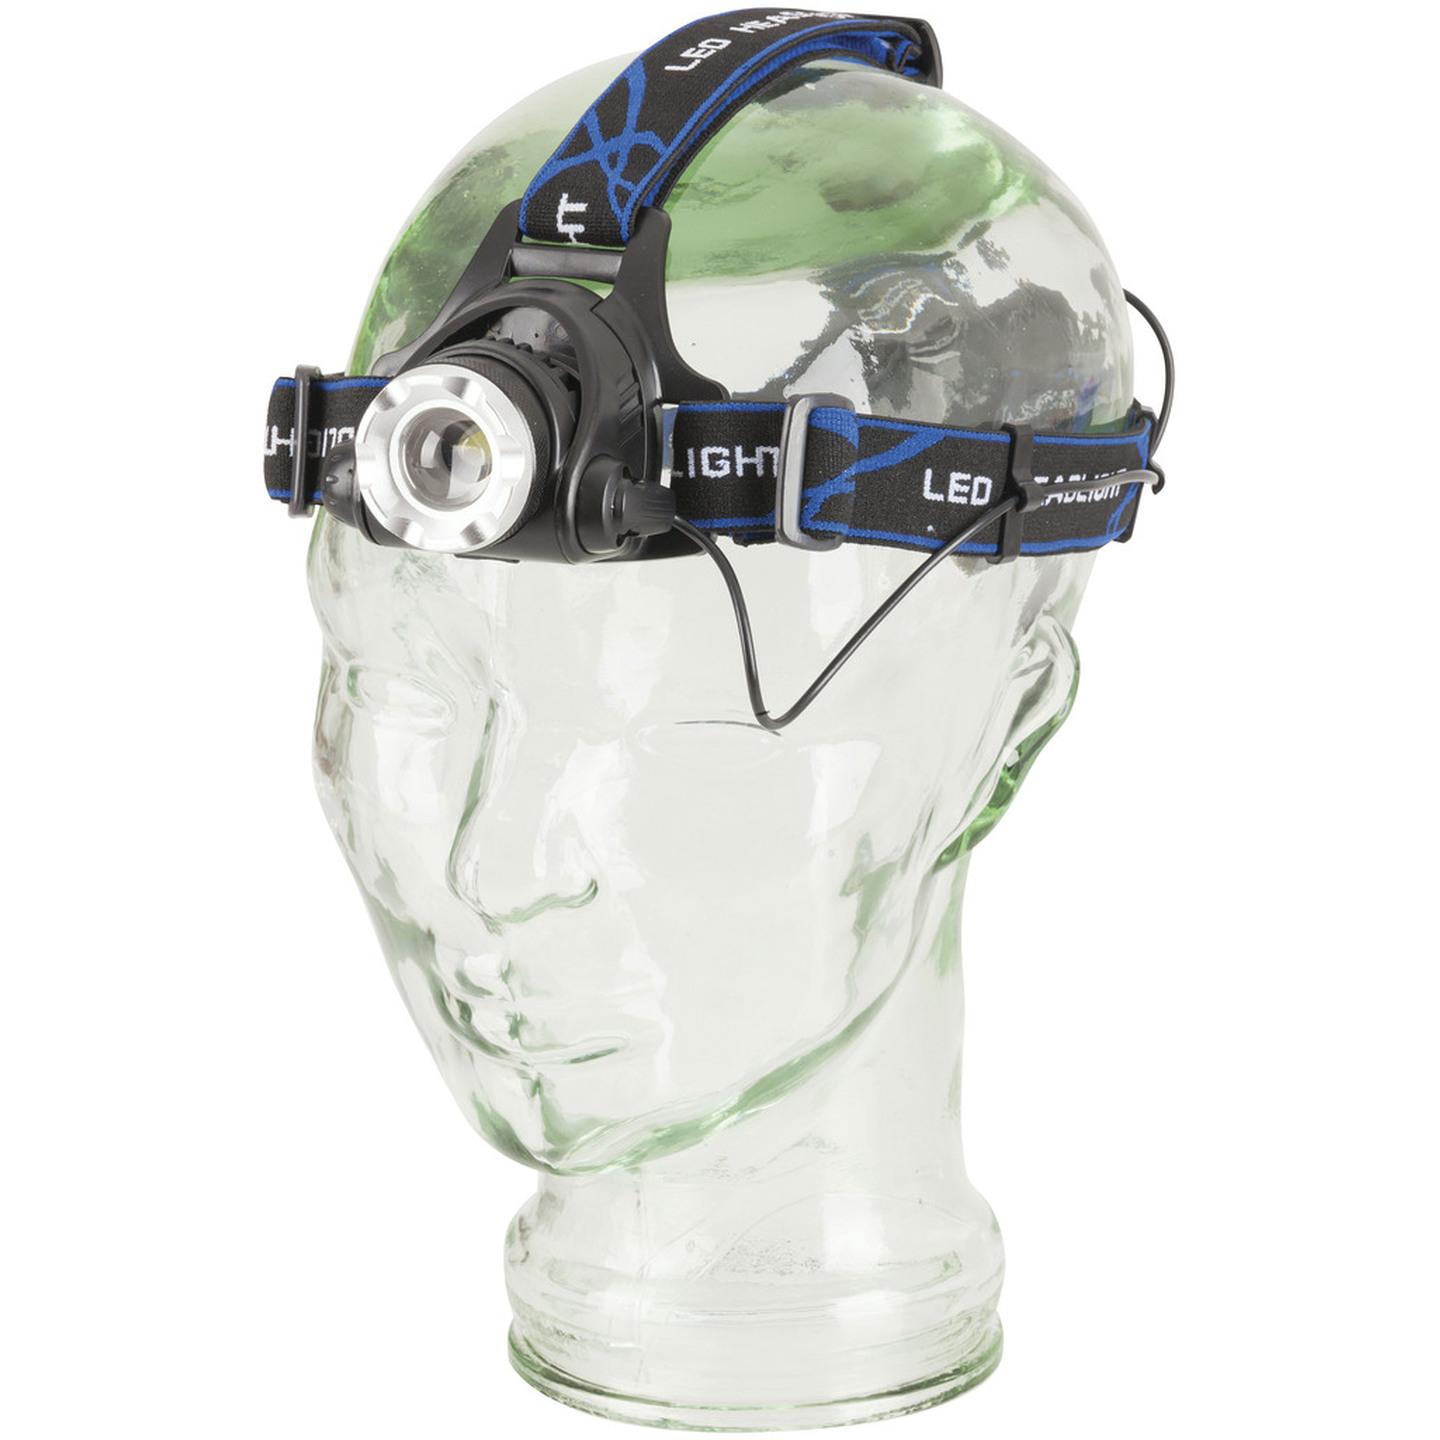 Head Torch with Adjustable Beam